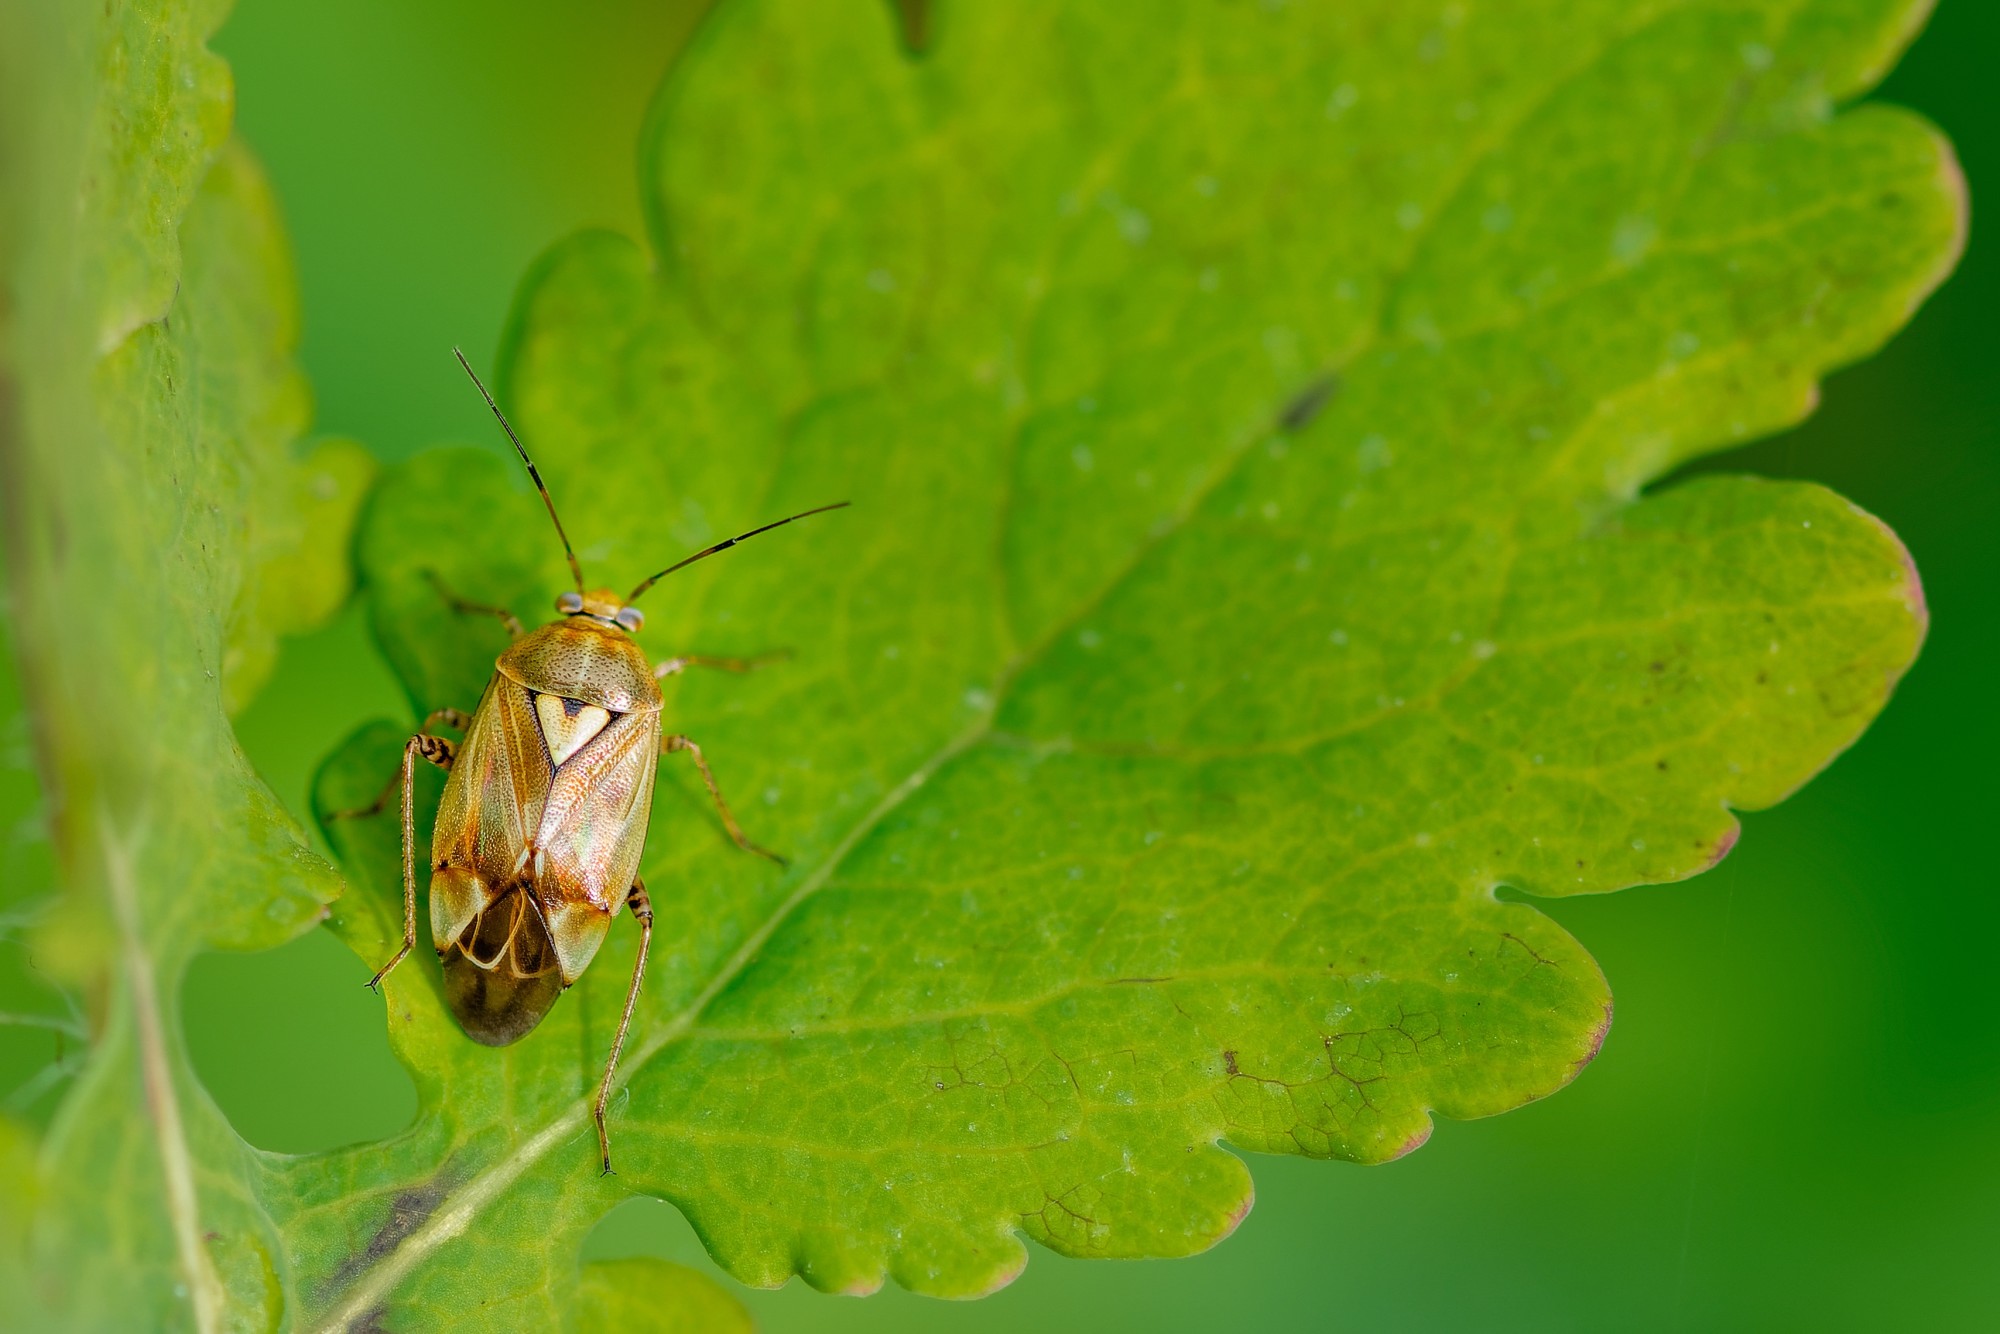 Pests can be incredibly frustrating throughout the year. Here's a quick look at common pests that you can expect during winter.